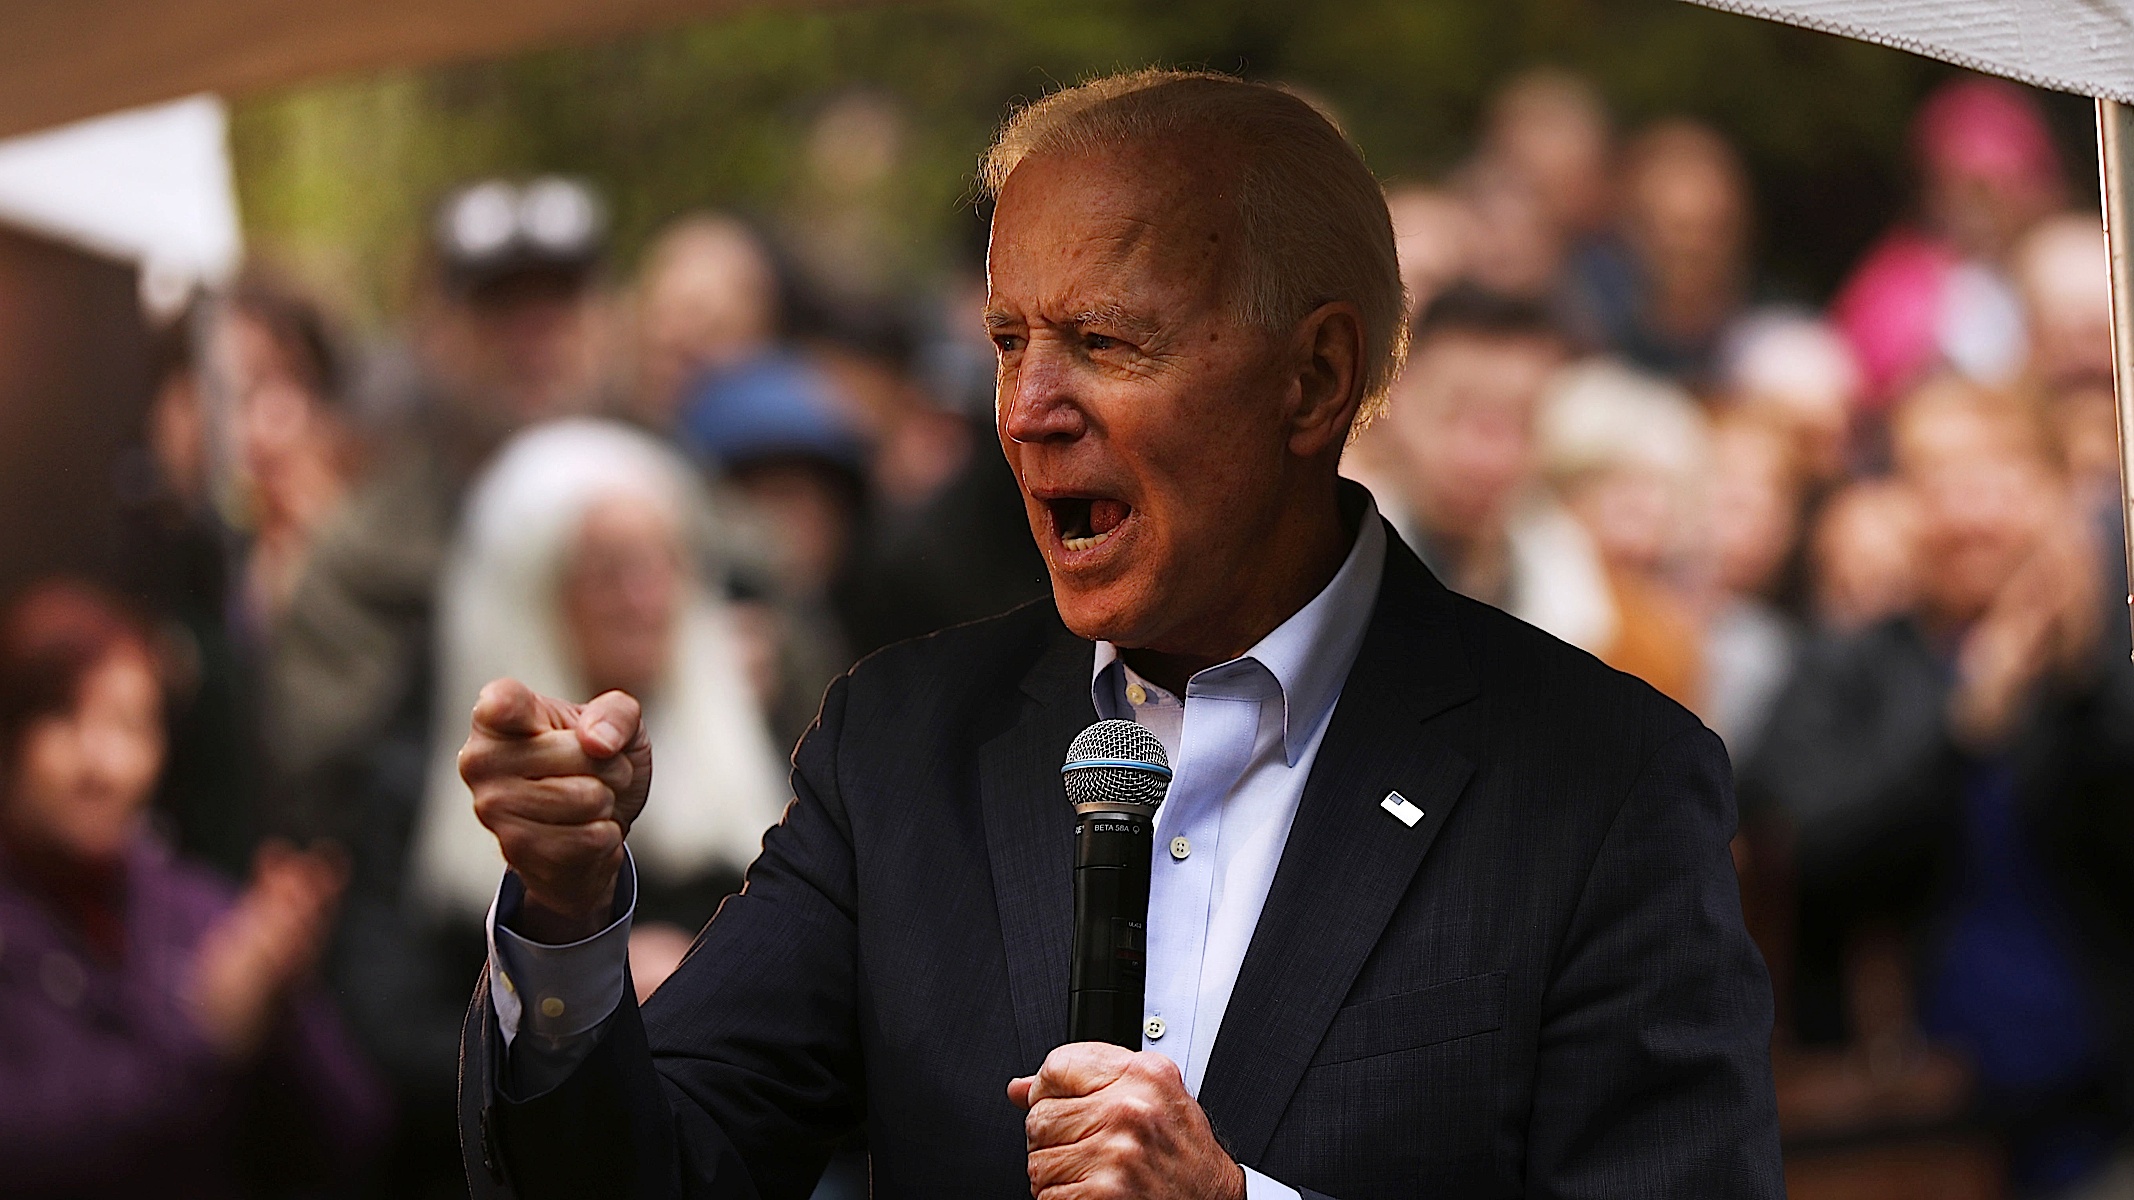 WATCH: Joe Biden Once Boasted About Wanting to Cut Social Security, Medicare, Medicaid, and Veterans&#8217; Benefits